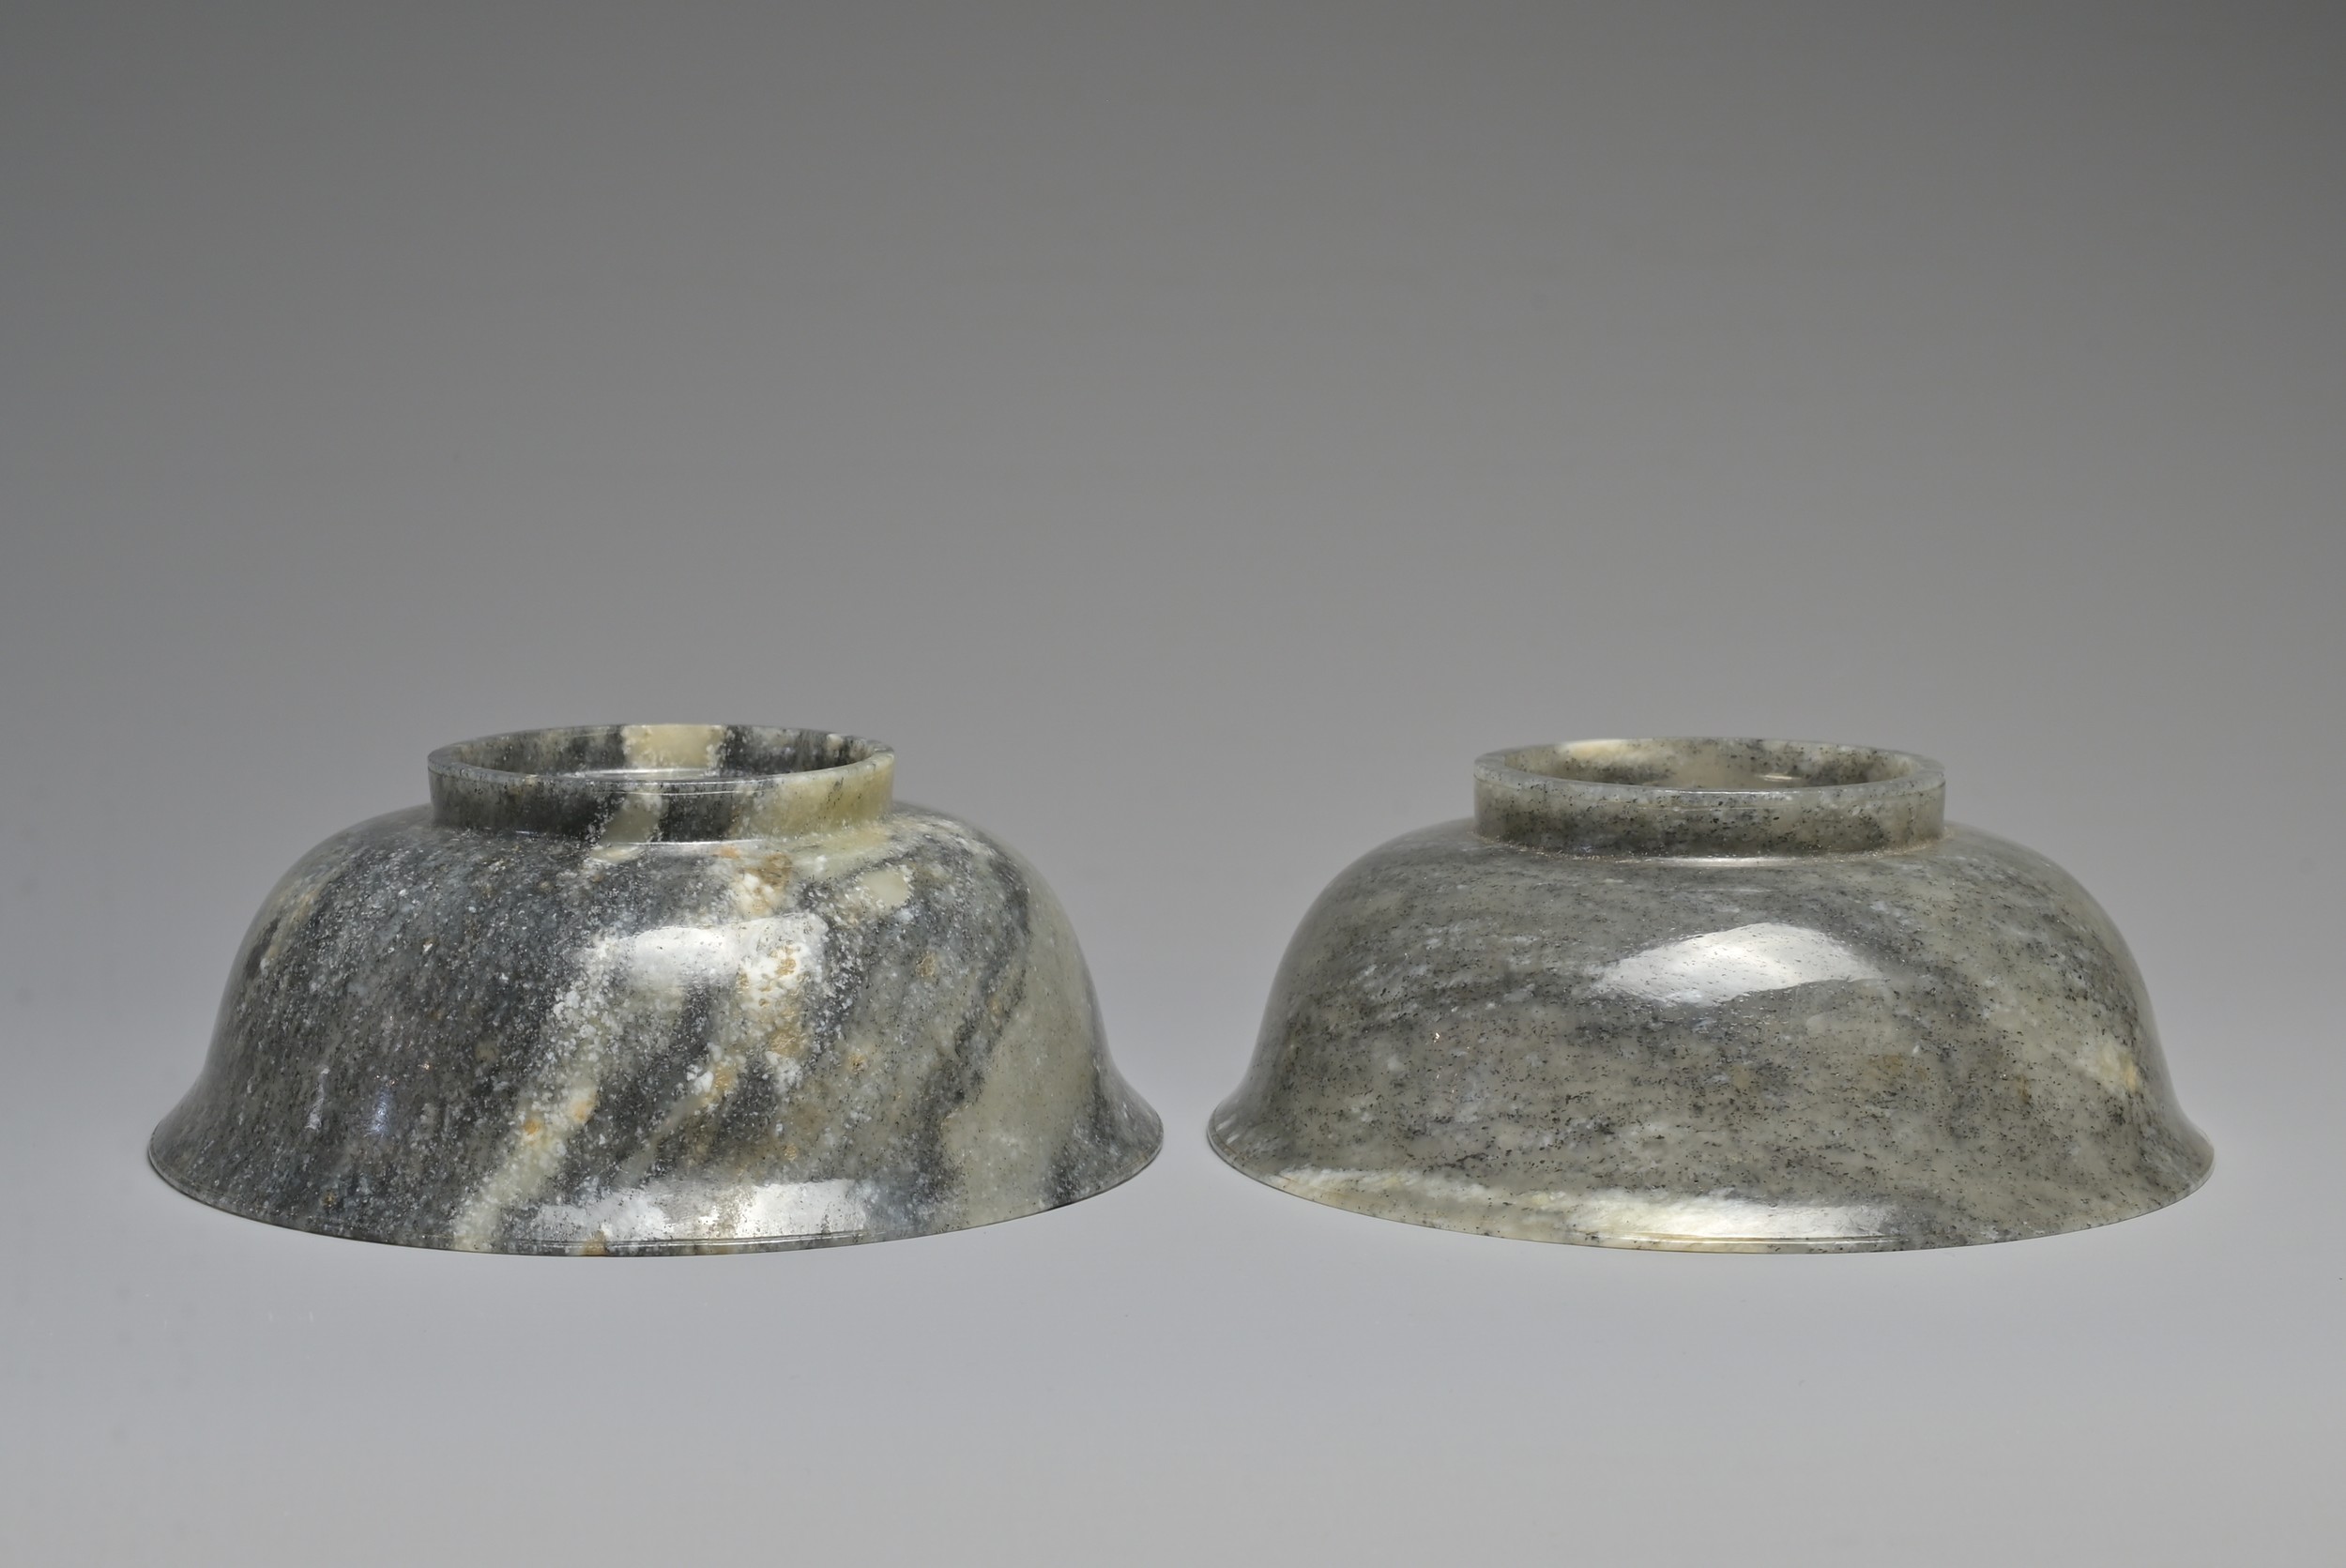 A FINE AND RARE PAIR OF CHINESE BLACK AND WHITE STRIATED NEPHRITE JADE BOWLS, 18/19TH CENTURY. - Image 4 of 32